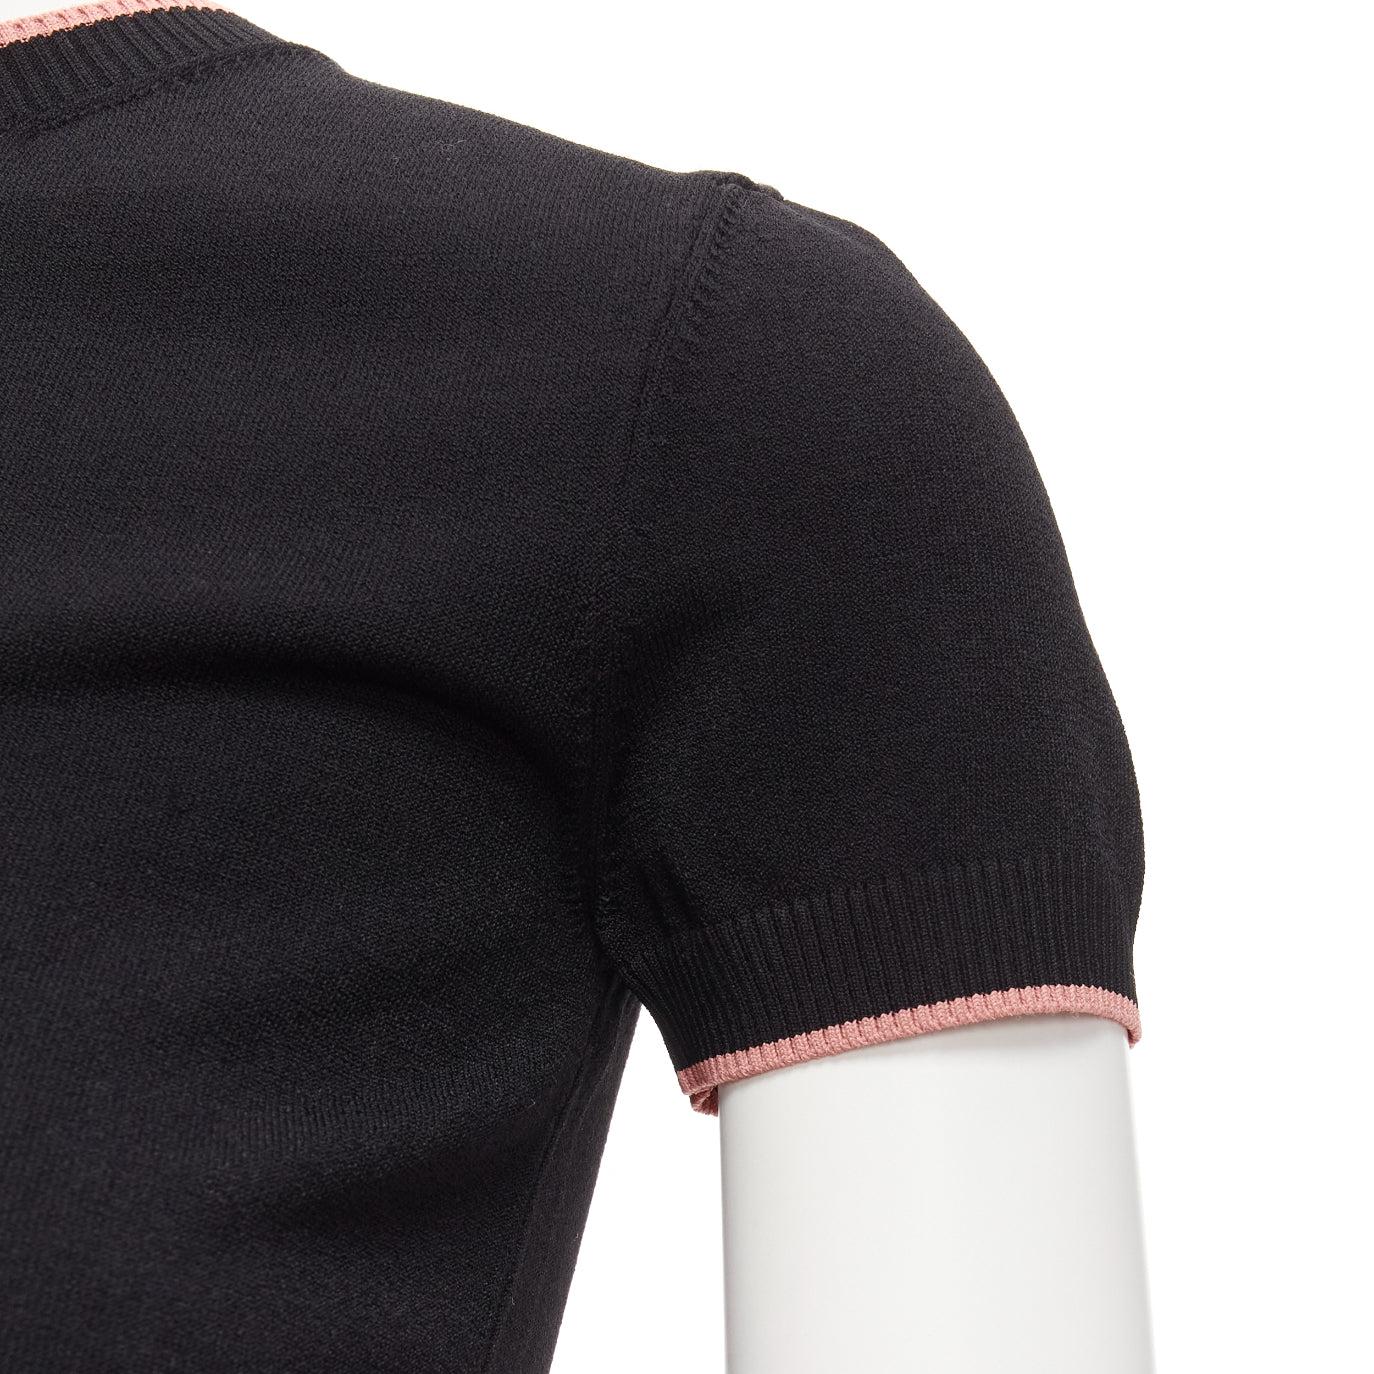 VALENTINO black pink rib trim crew neck short sleeve cropped sweater top S
Reference: LNKO/A02307
Brand: Valentino
Designer: Pier Paolo Piccioli
Material: Viscose, Blend
Color: Black, Pink
Pattern: Solid
Closure: Slip On
Made in: